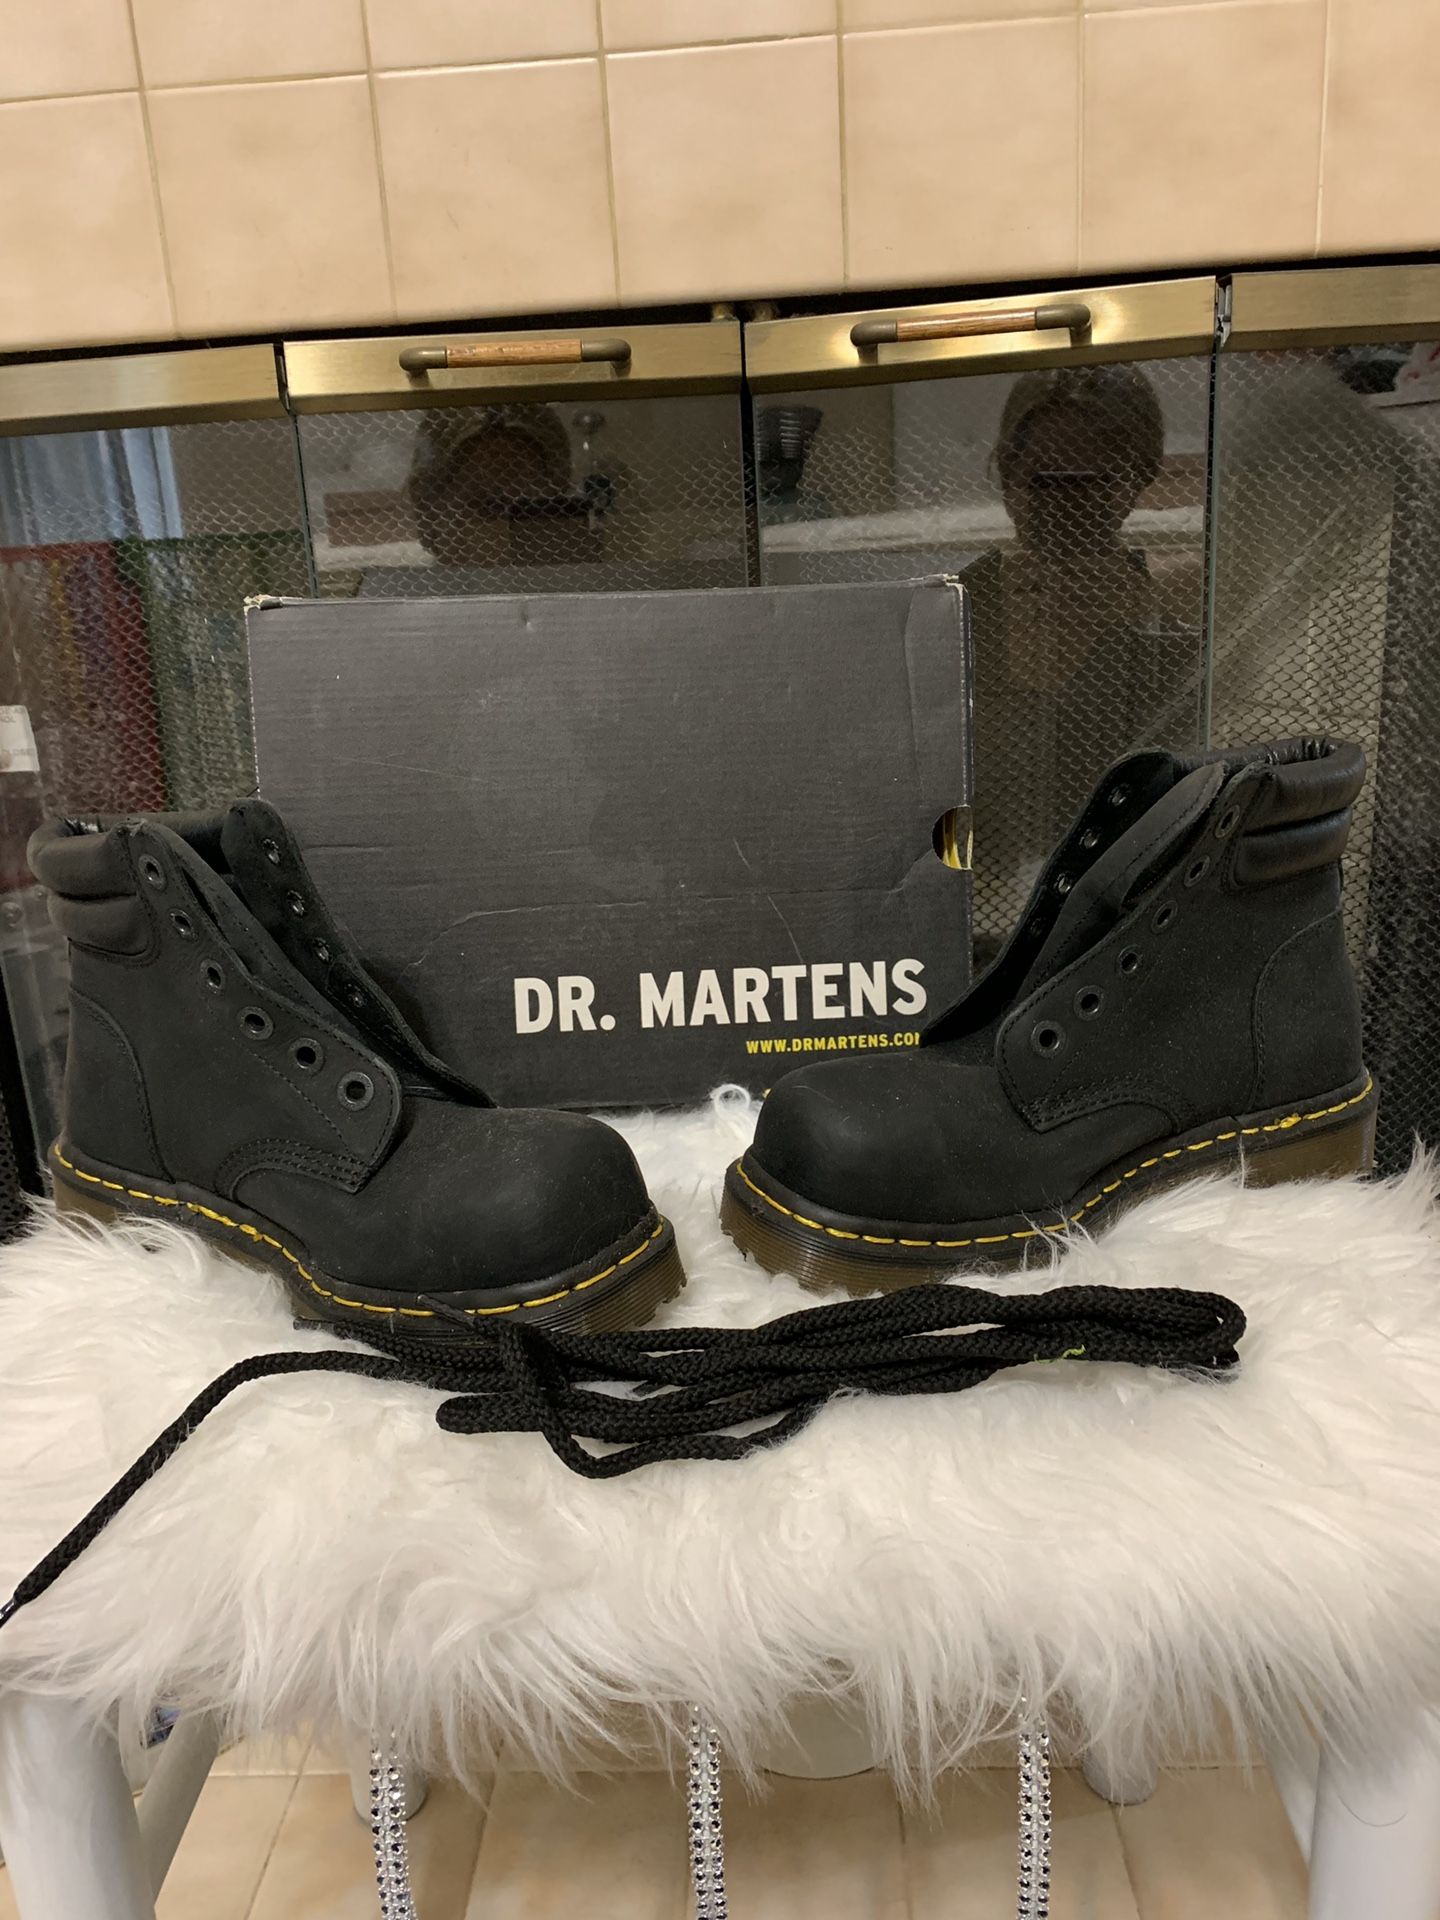 Brand new in box Dr. Martens size US 6